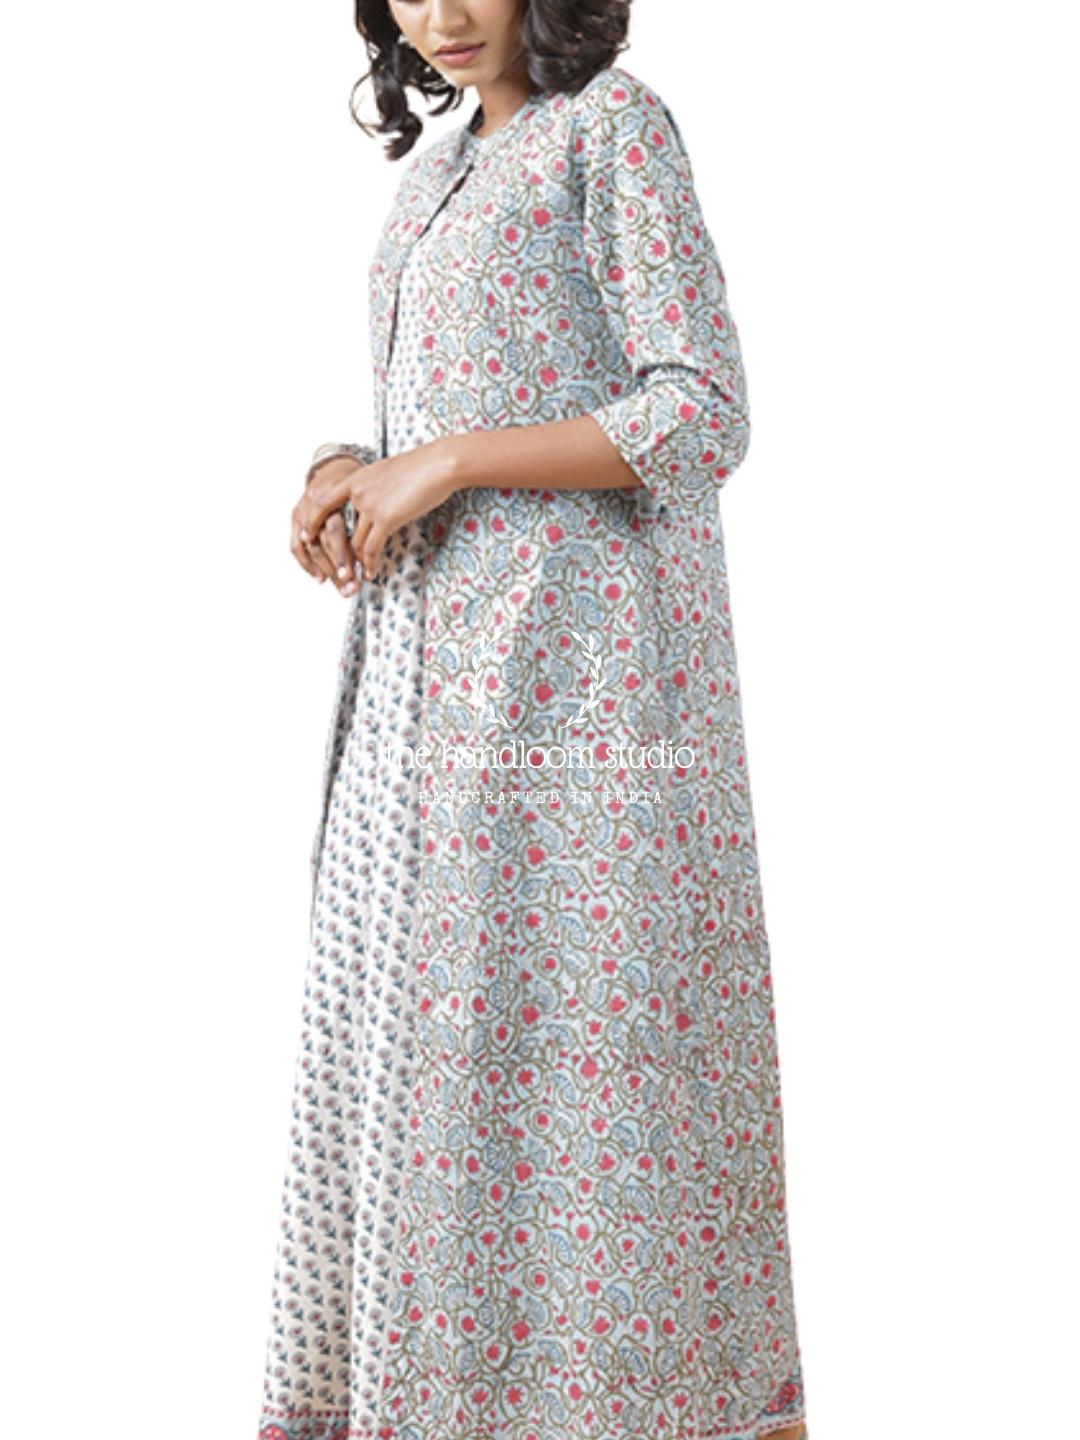 Short Kurta with Block Printed Red Floral Design Overlay